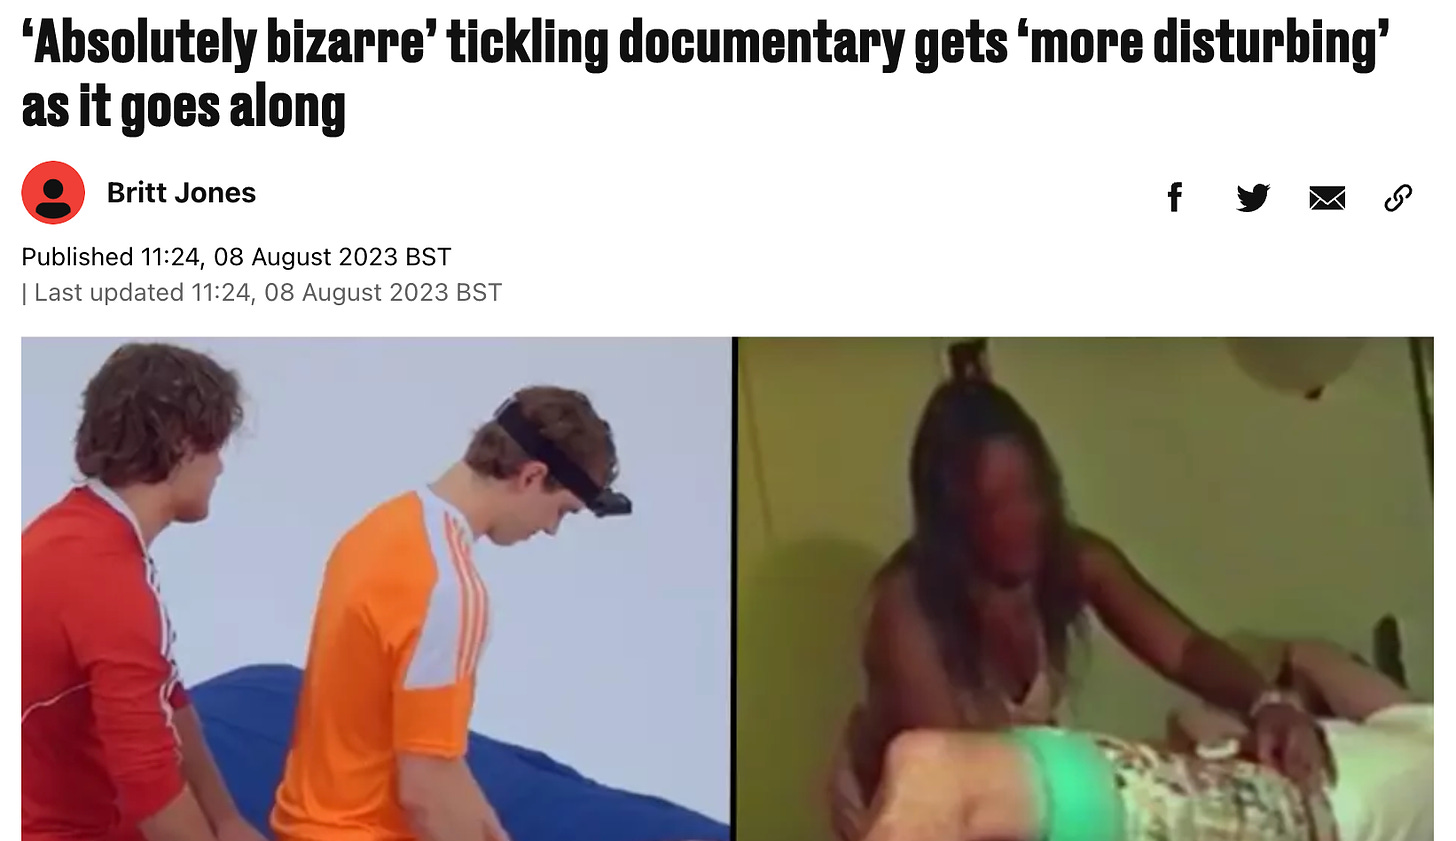 "‘Absolutely bizarre’ tickling documentary gets ‘more disturbing’ as it goes along"